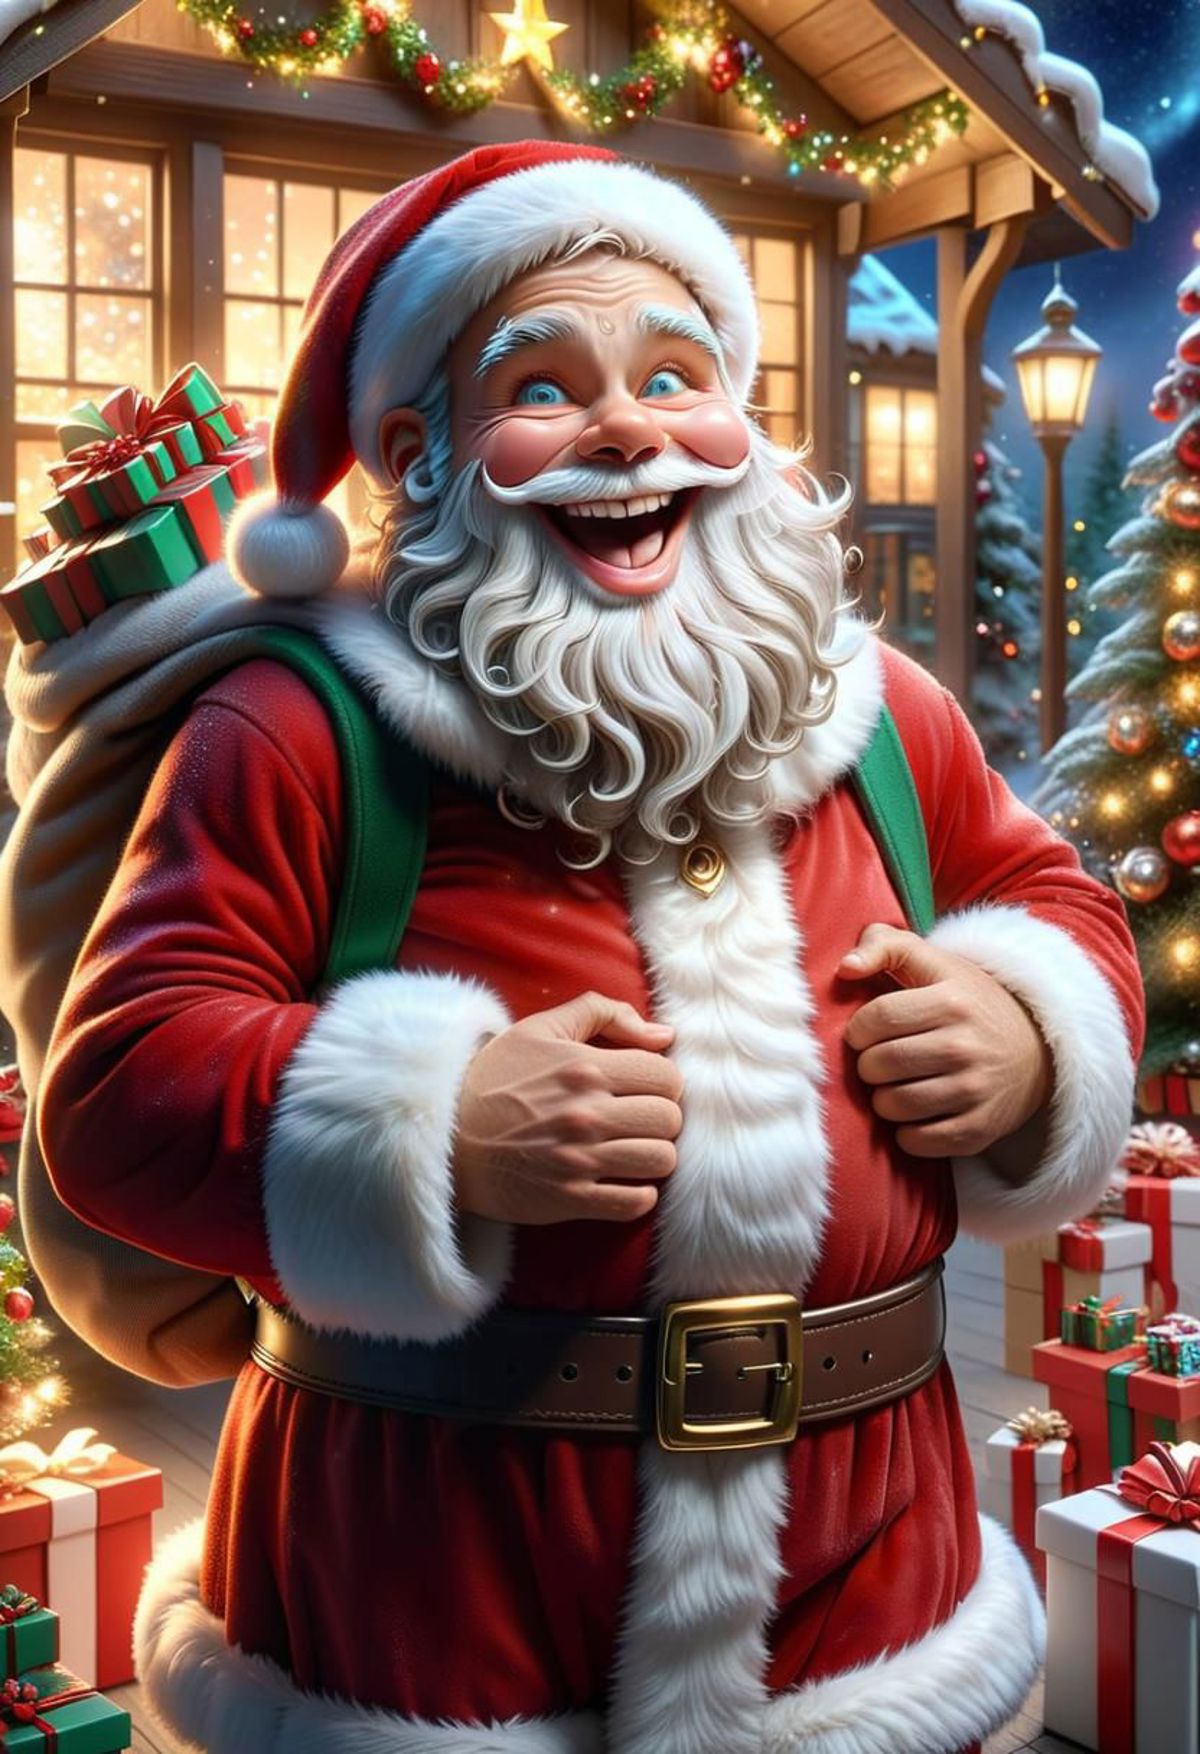 A Santa Claus figure with a sack and a big smile.